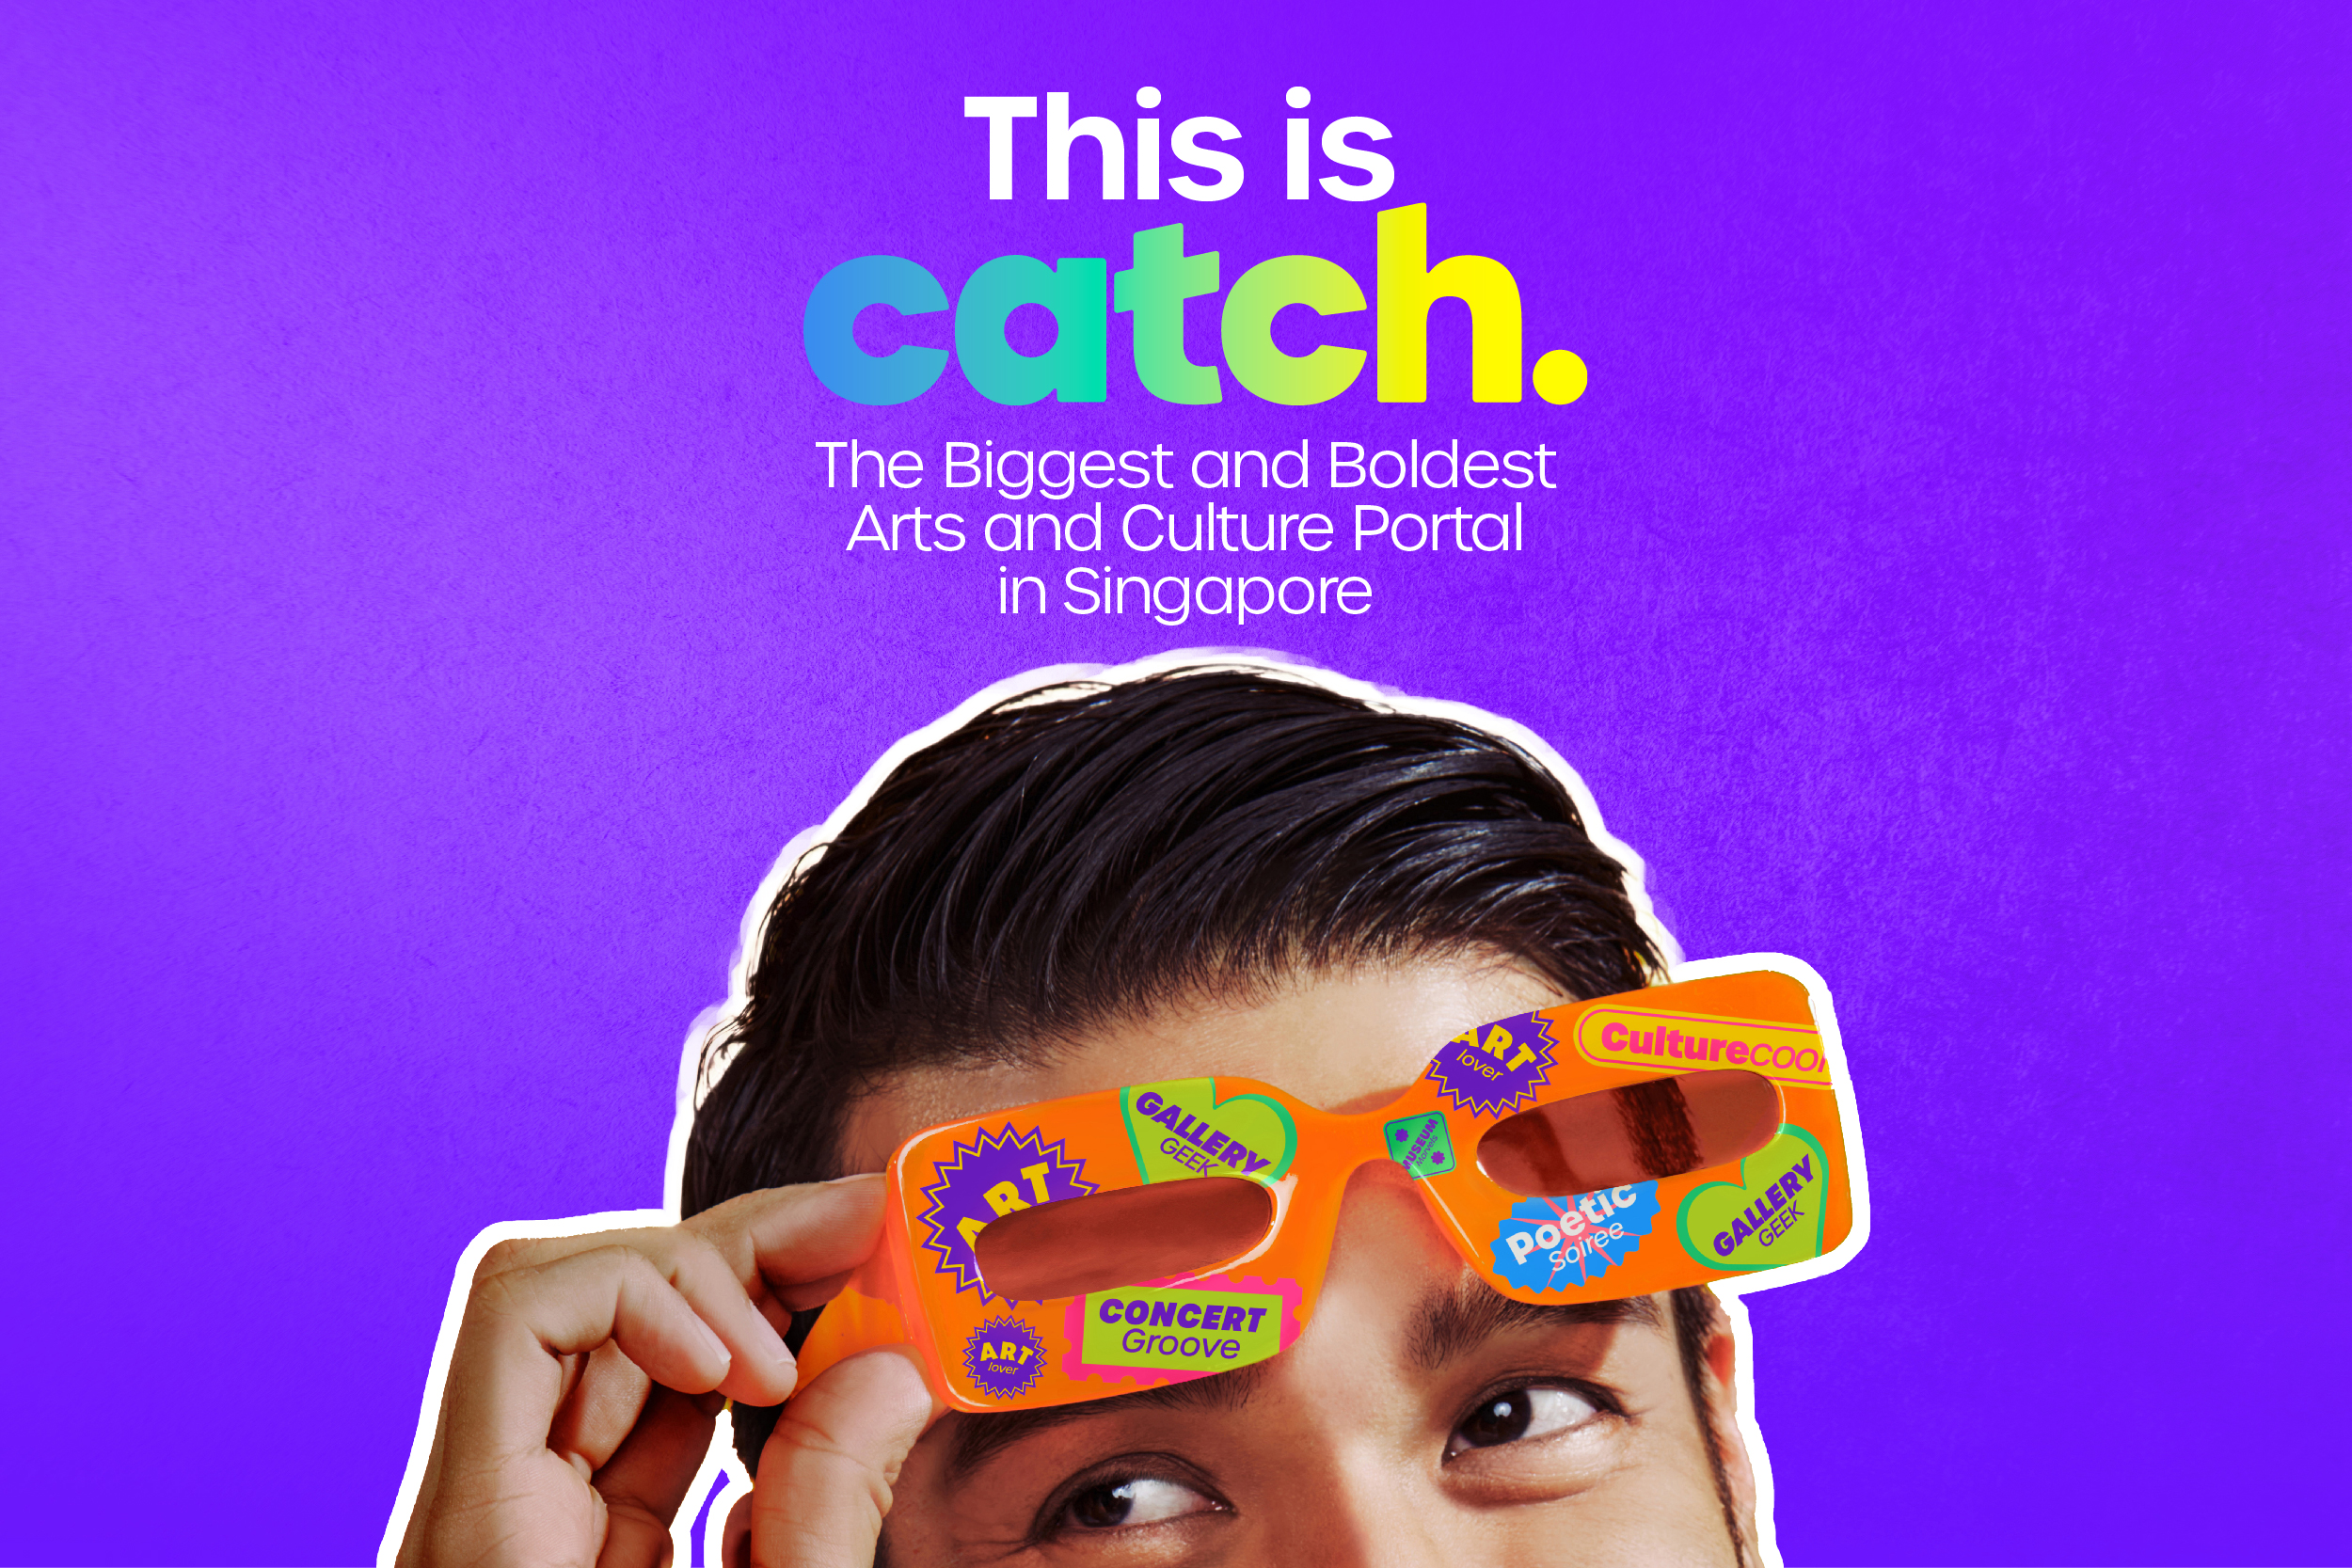 Visual depicting Catch’s logo and slogan